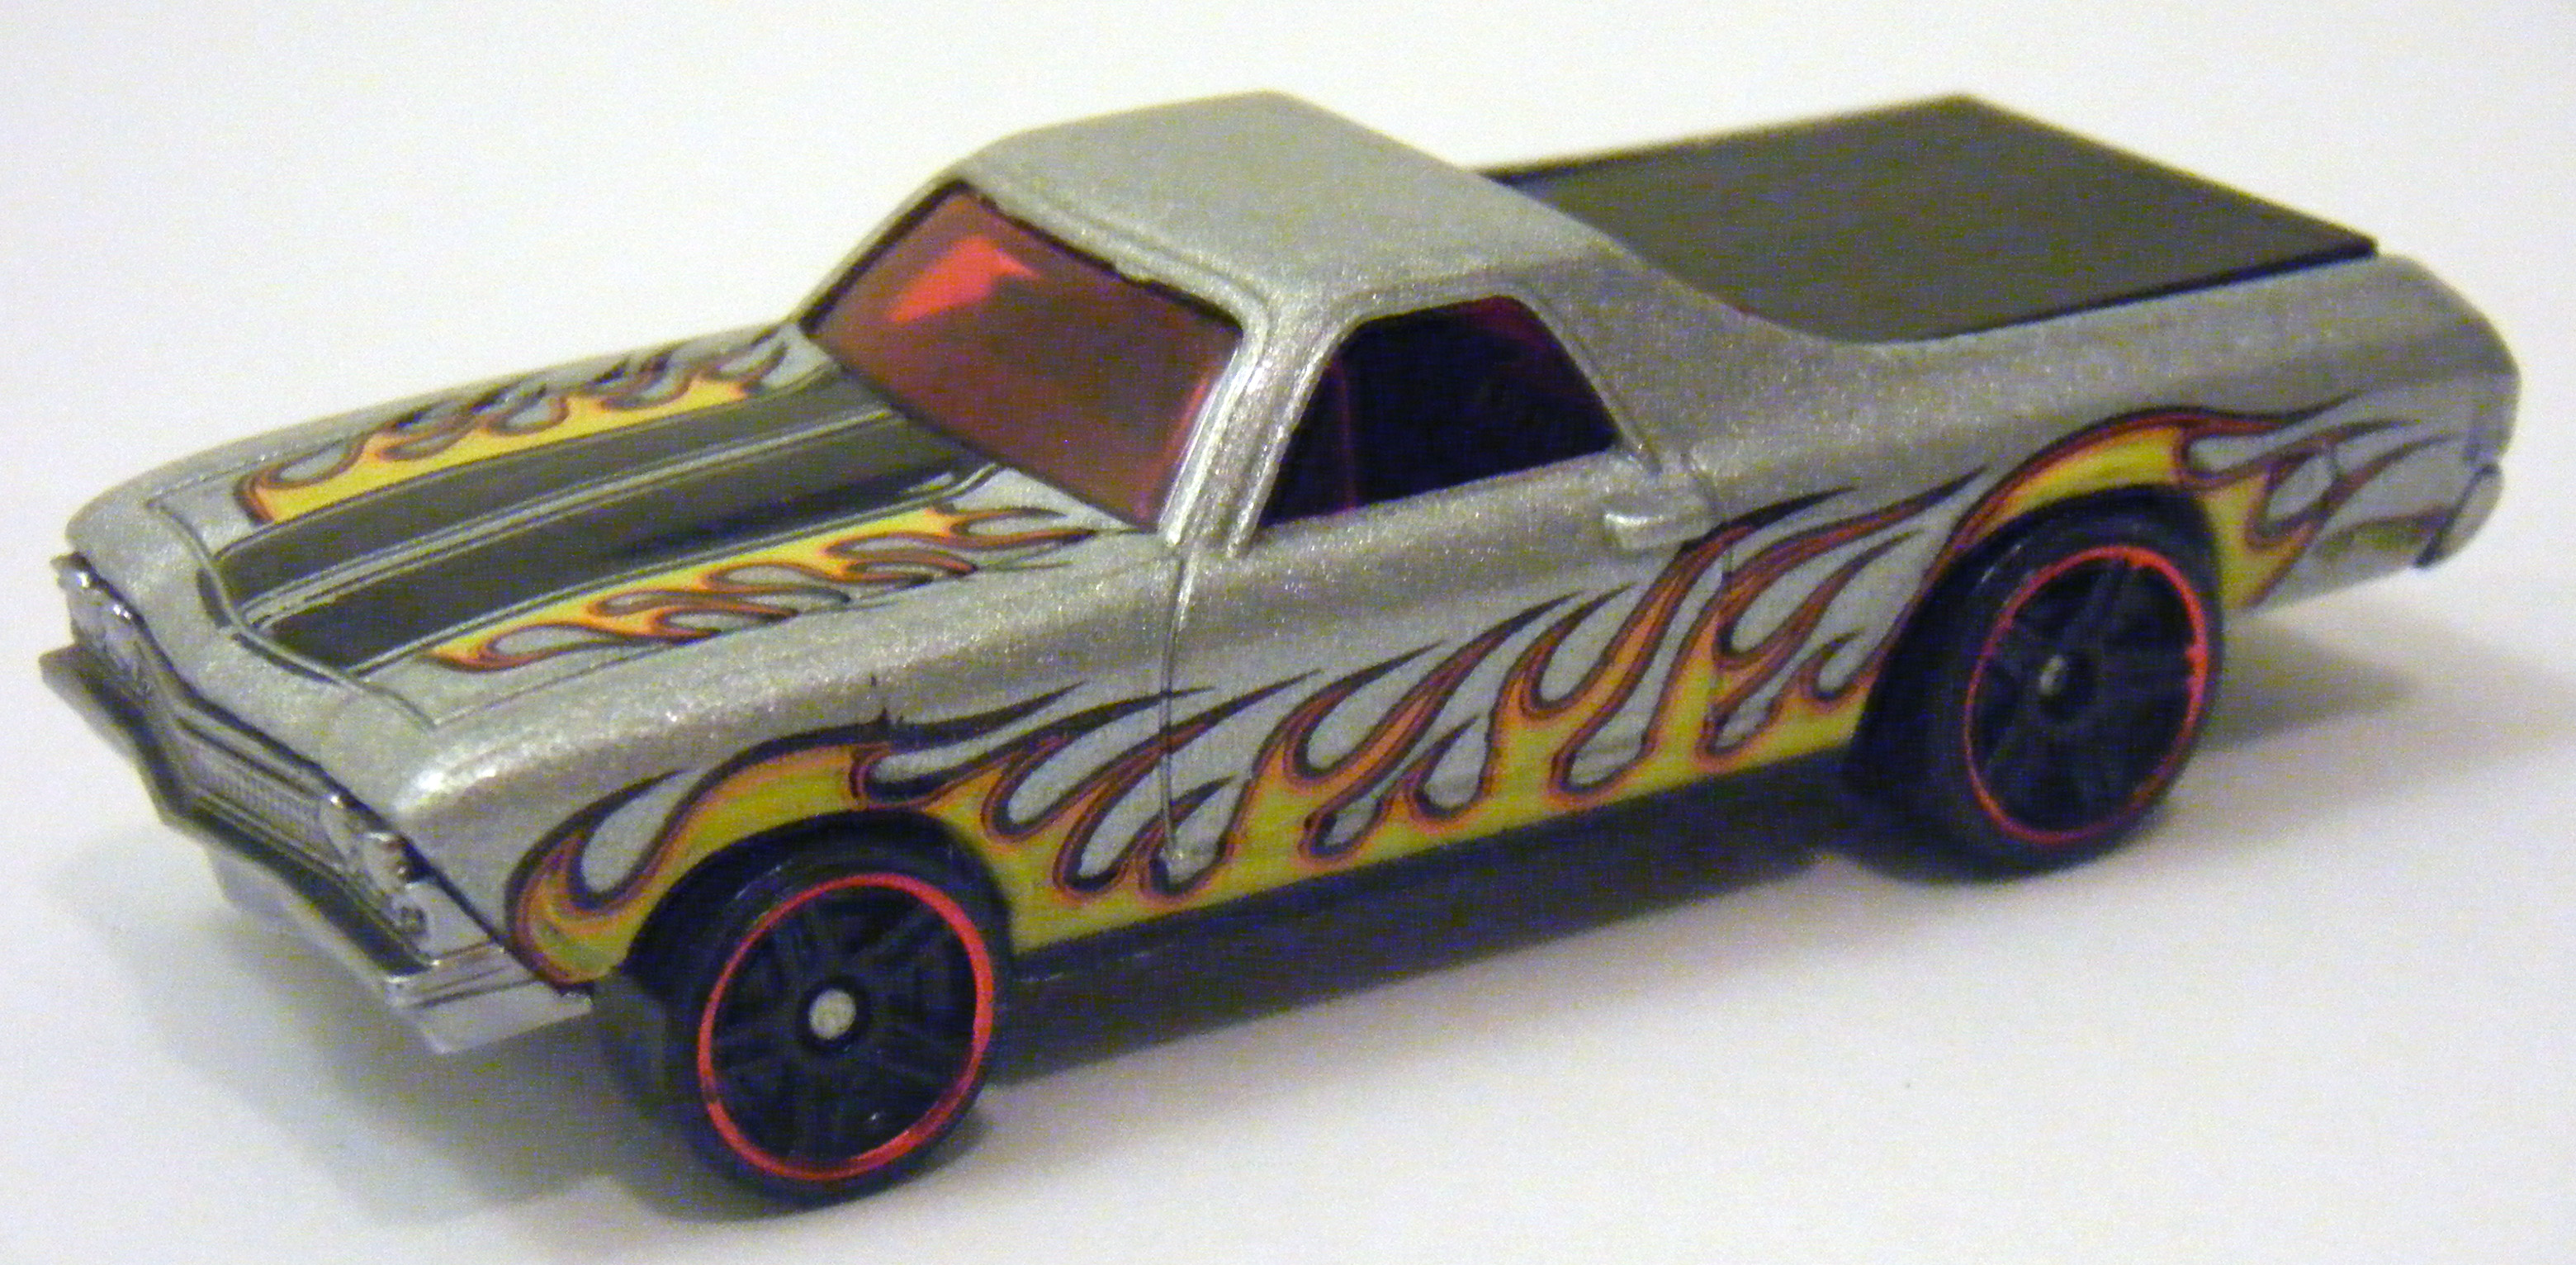 Details about   HOT WHEELS '68 El Camino Muscle Mania Metallic Green Series 4/10 